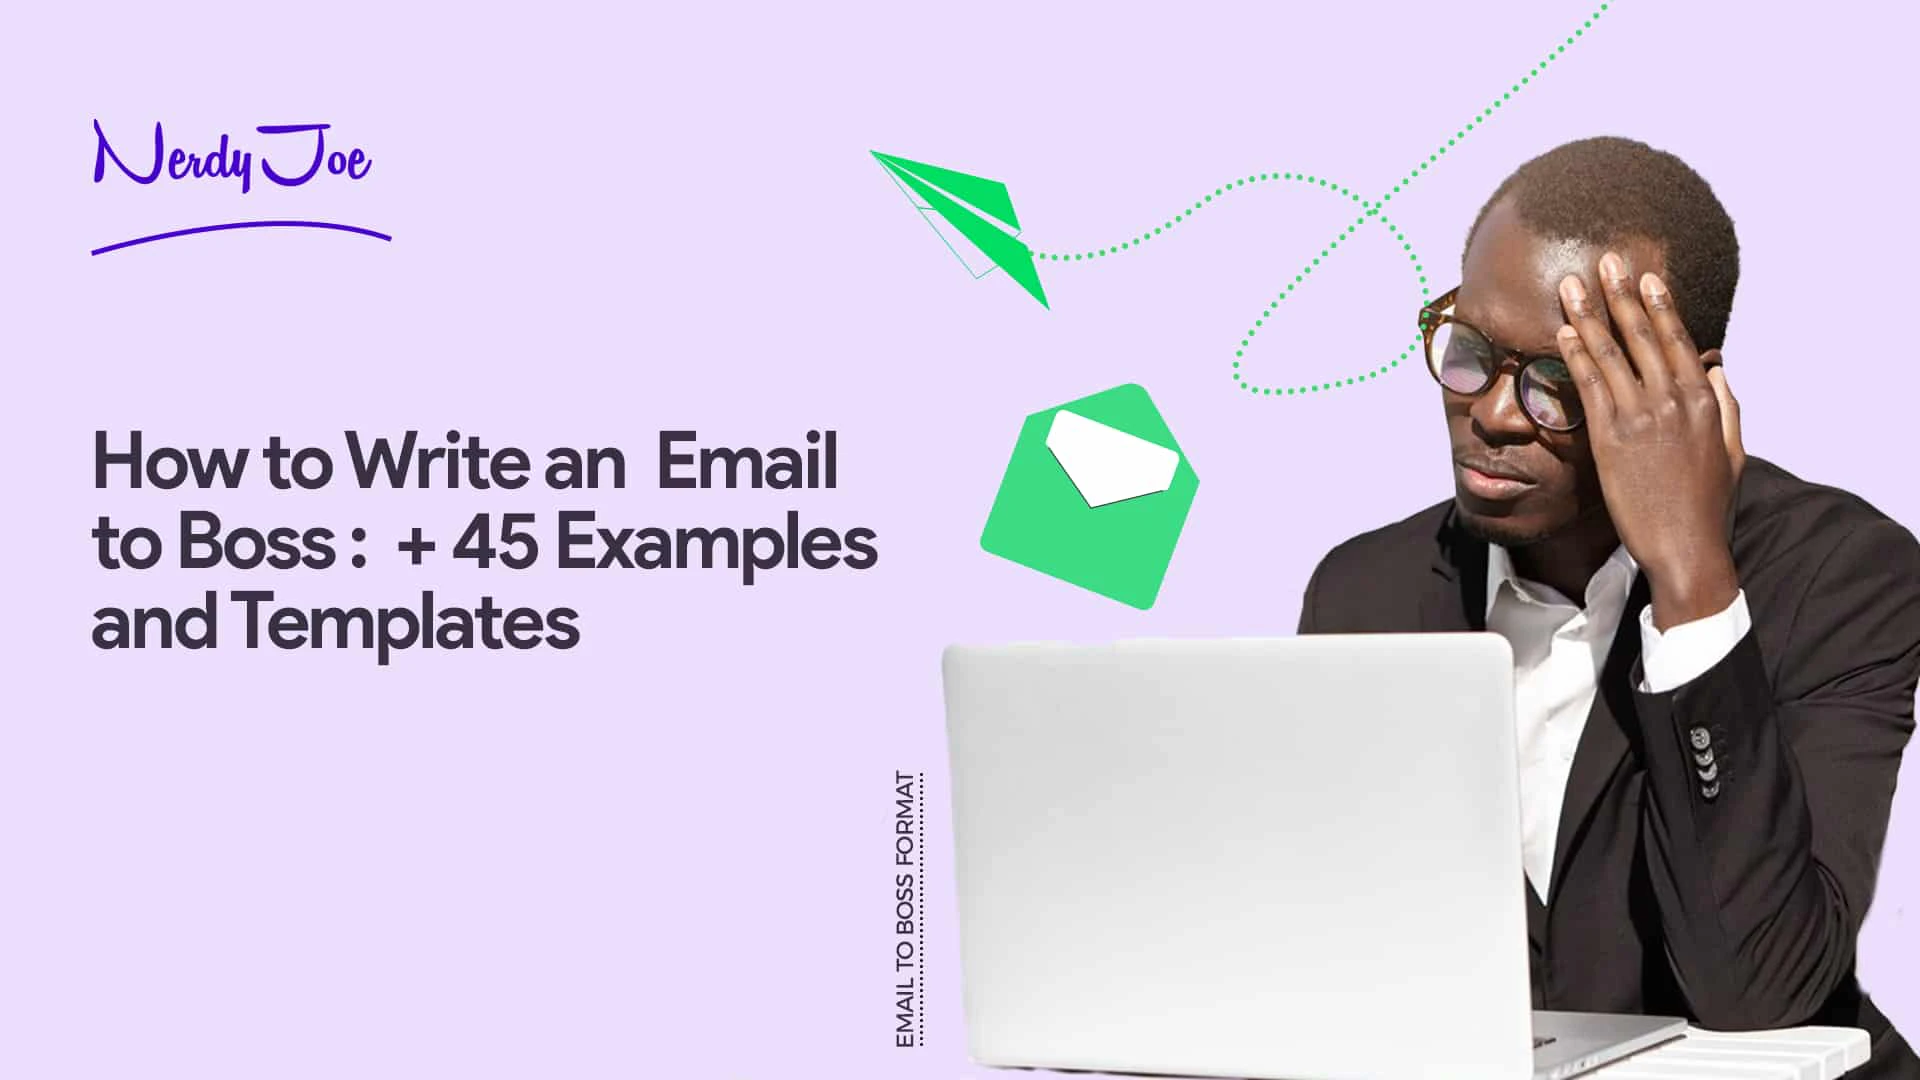 How to Write An Email to Boss With 45 Examples From Experts